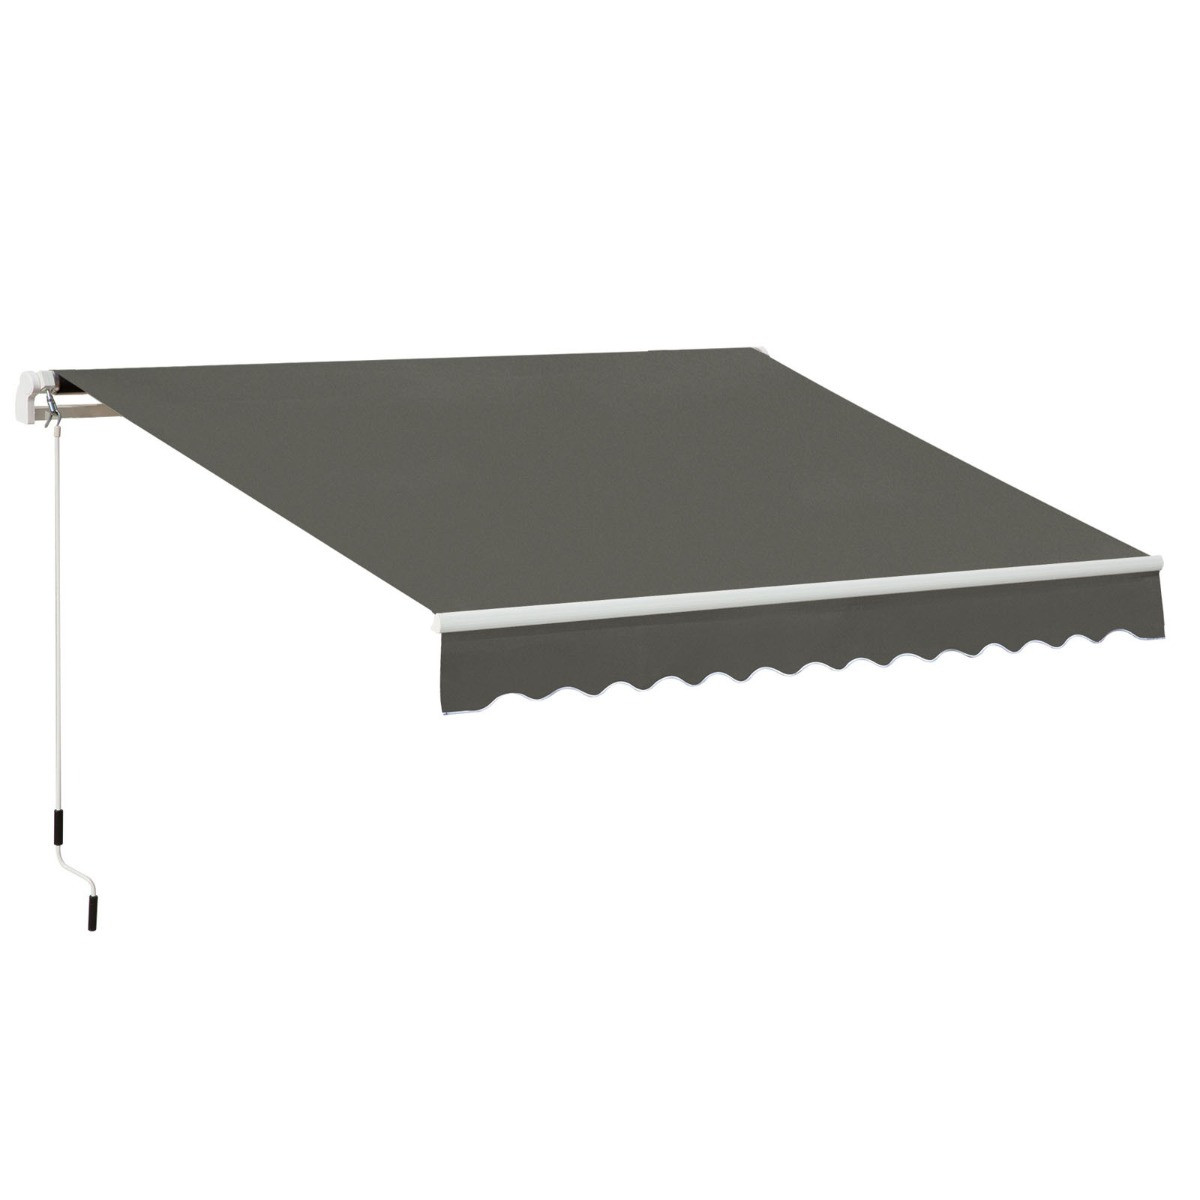 Outsunny Retractable Awning Canopy Shelter, Grey - 3X2M>